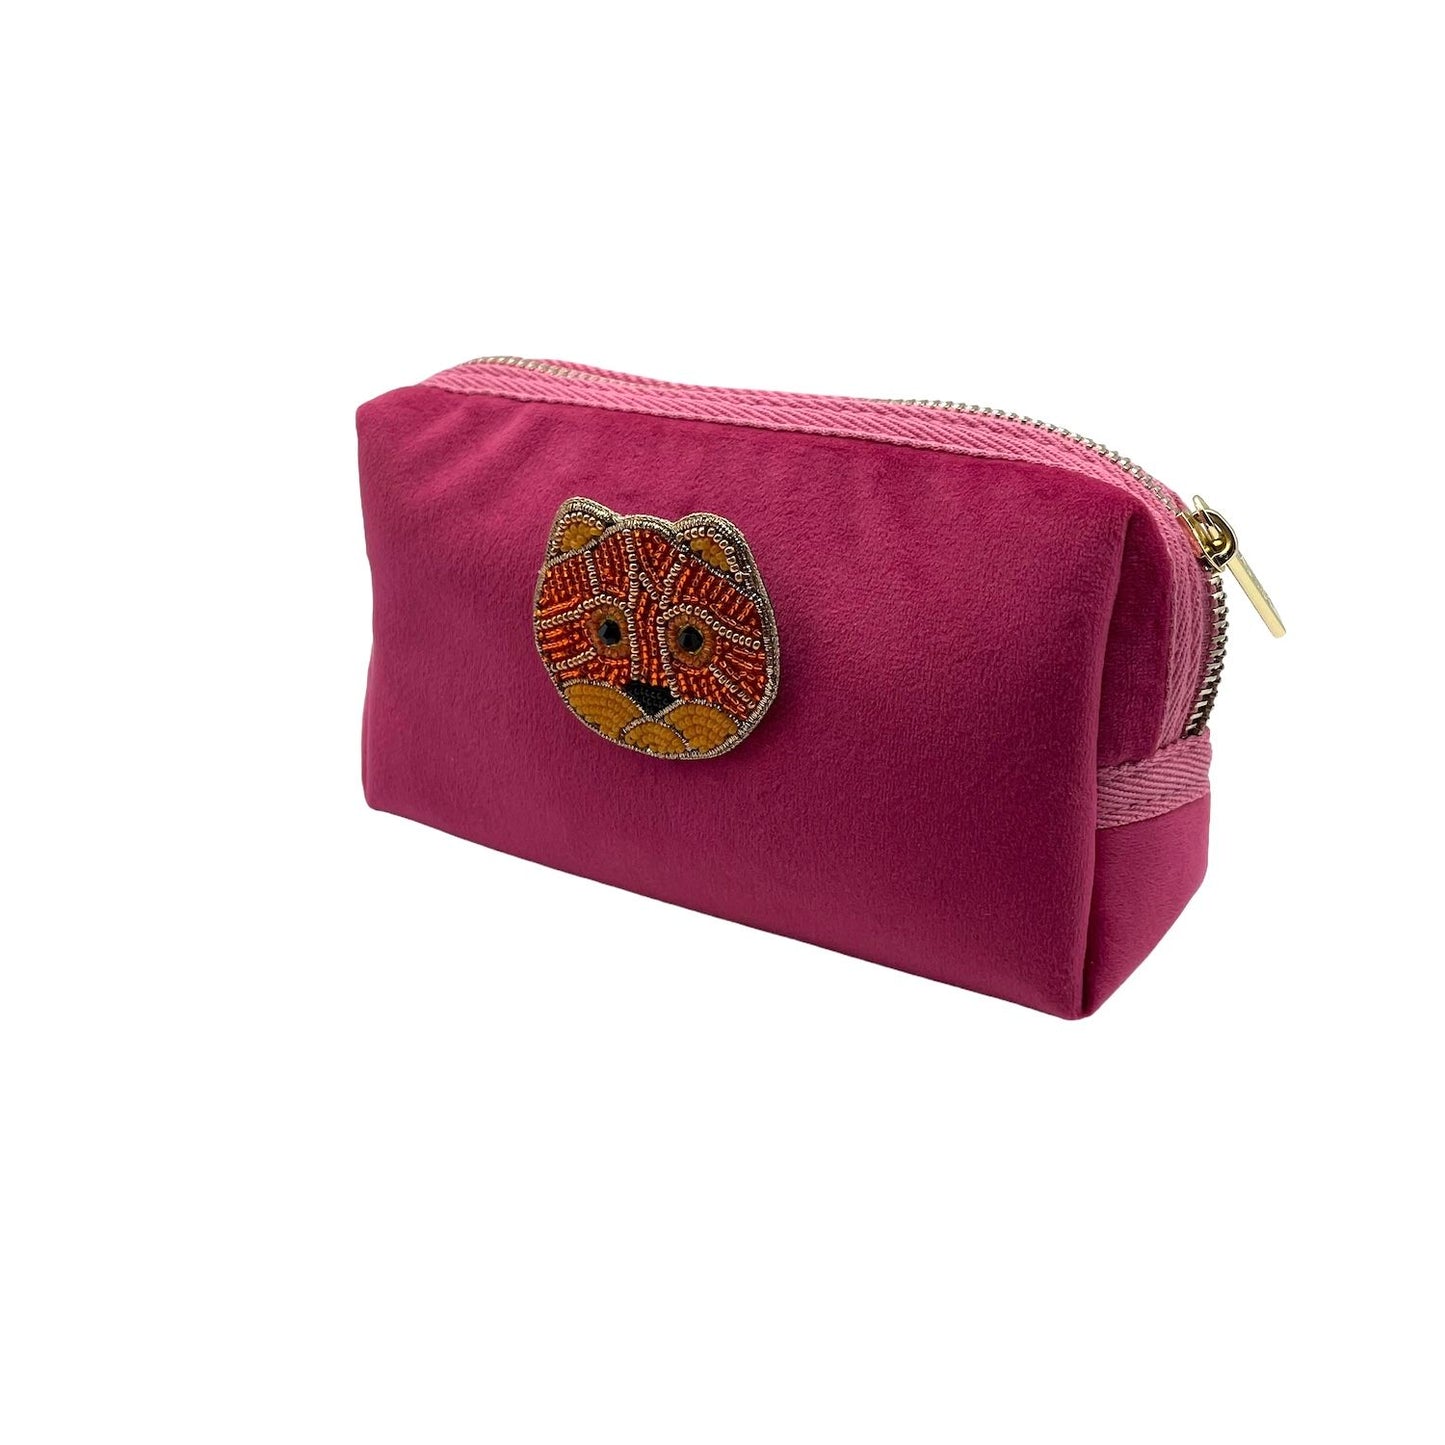 Bright pink make-up bag and a cat pin - recycled velvet